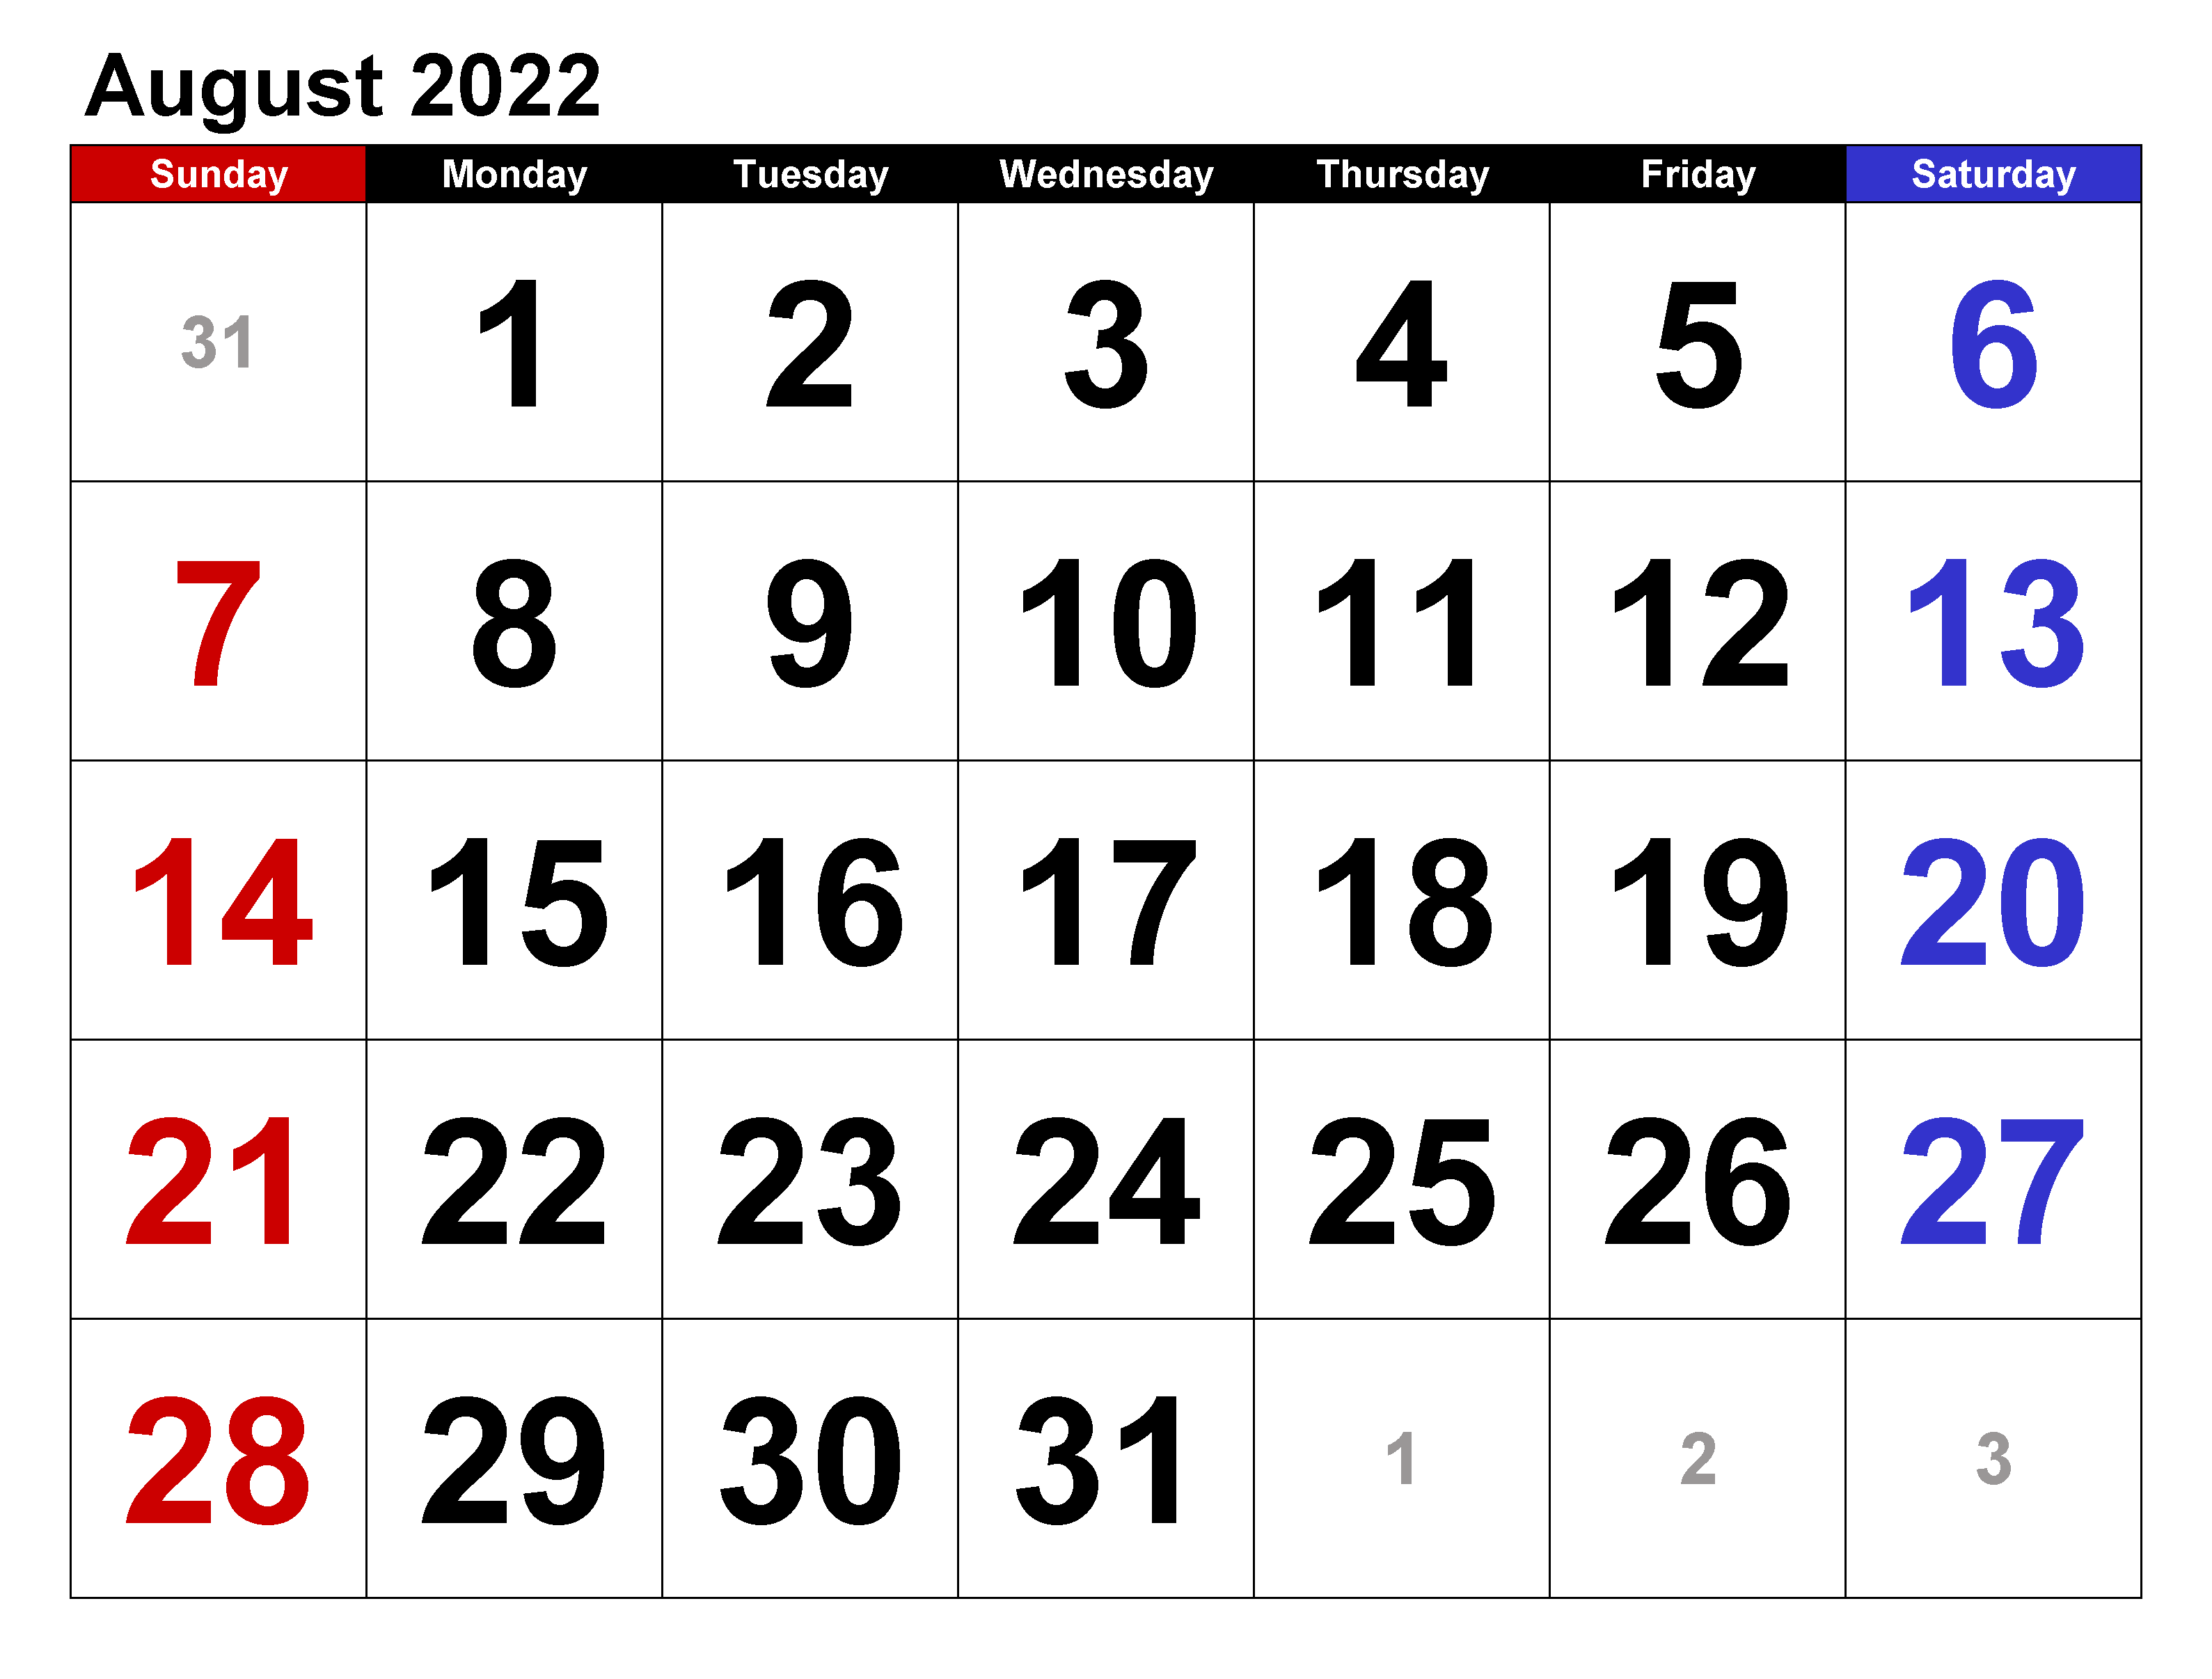 August 2022 Calendar Excel With Holidays